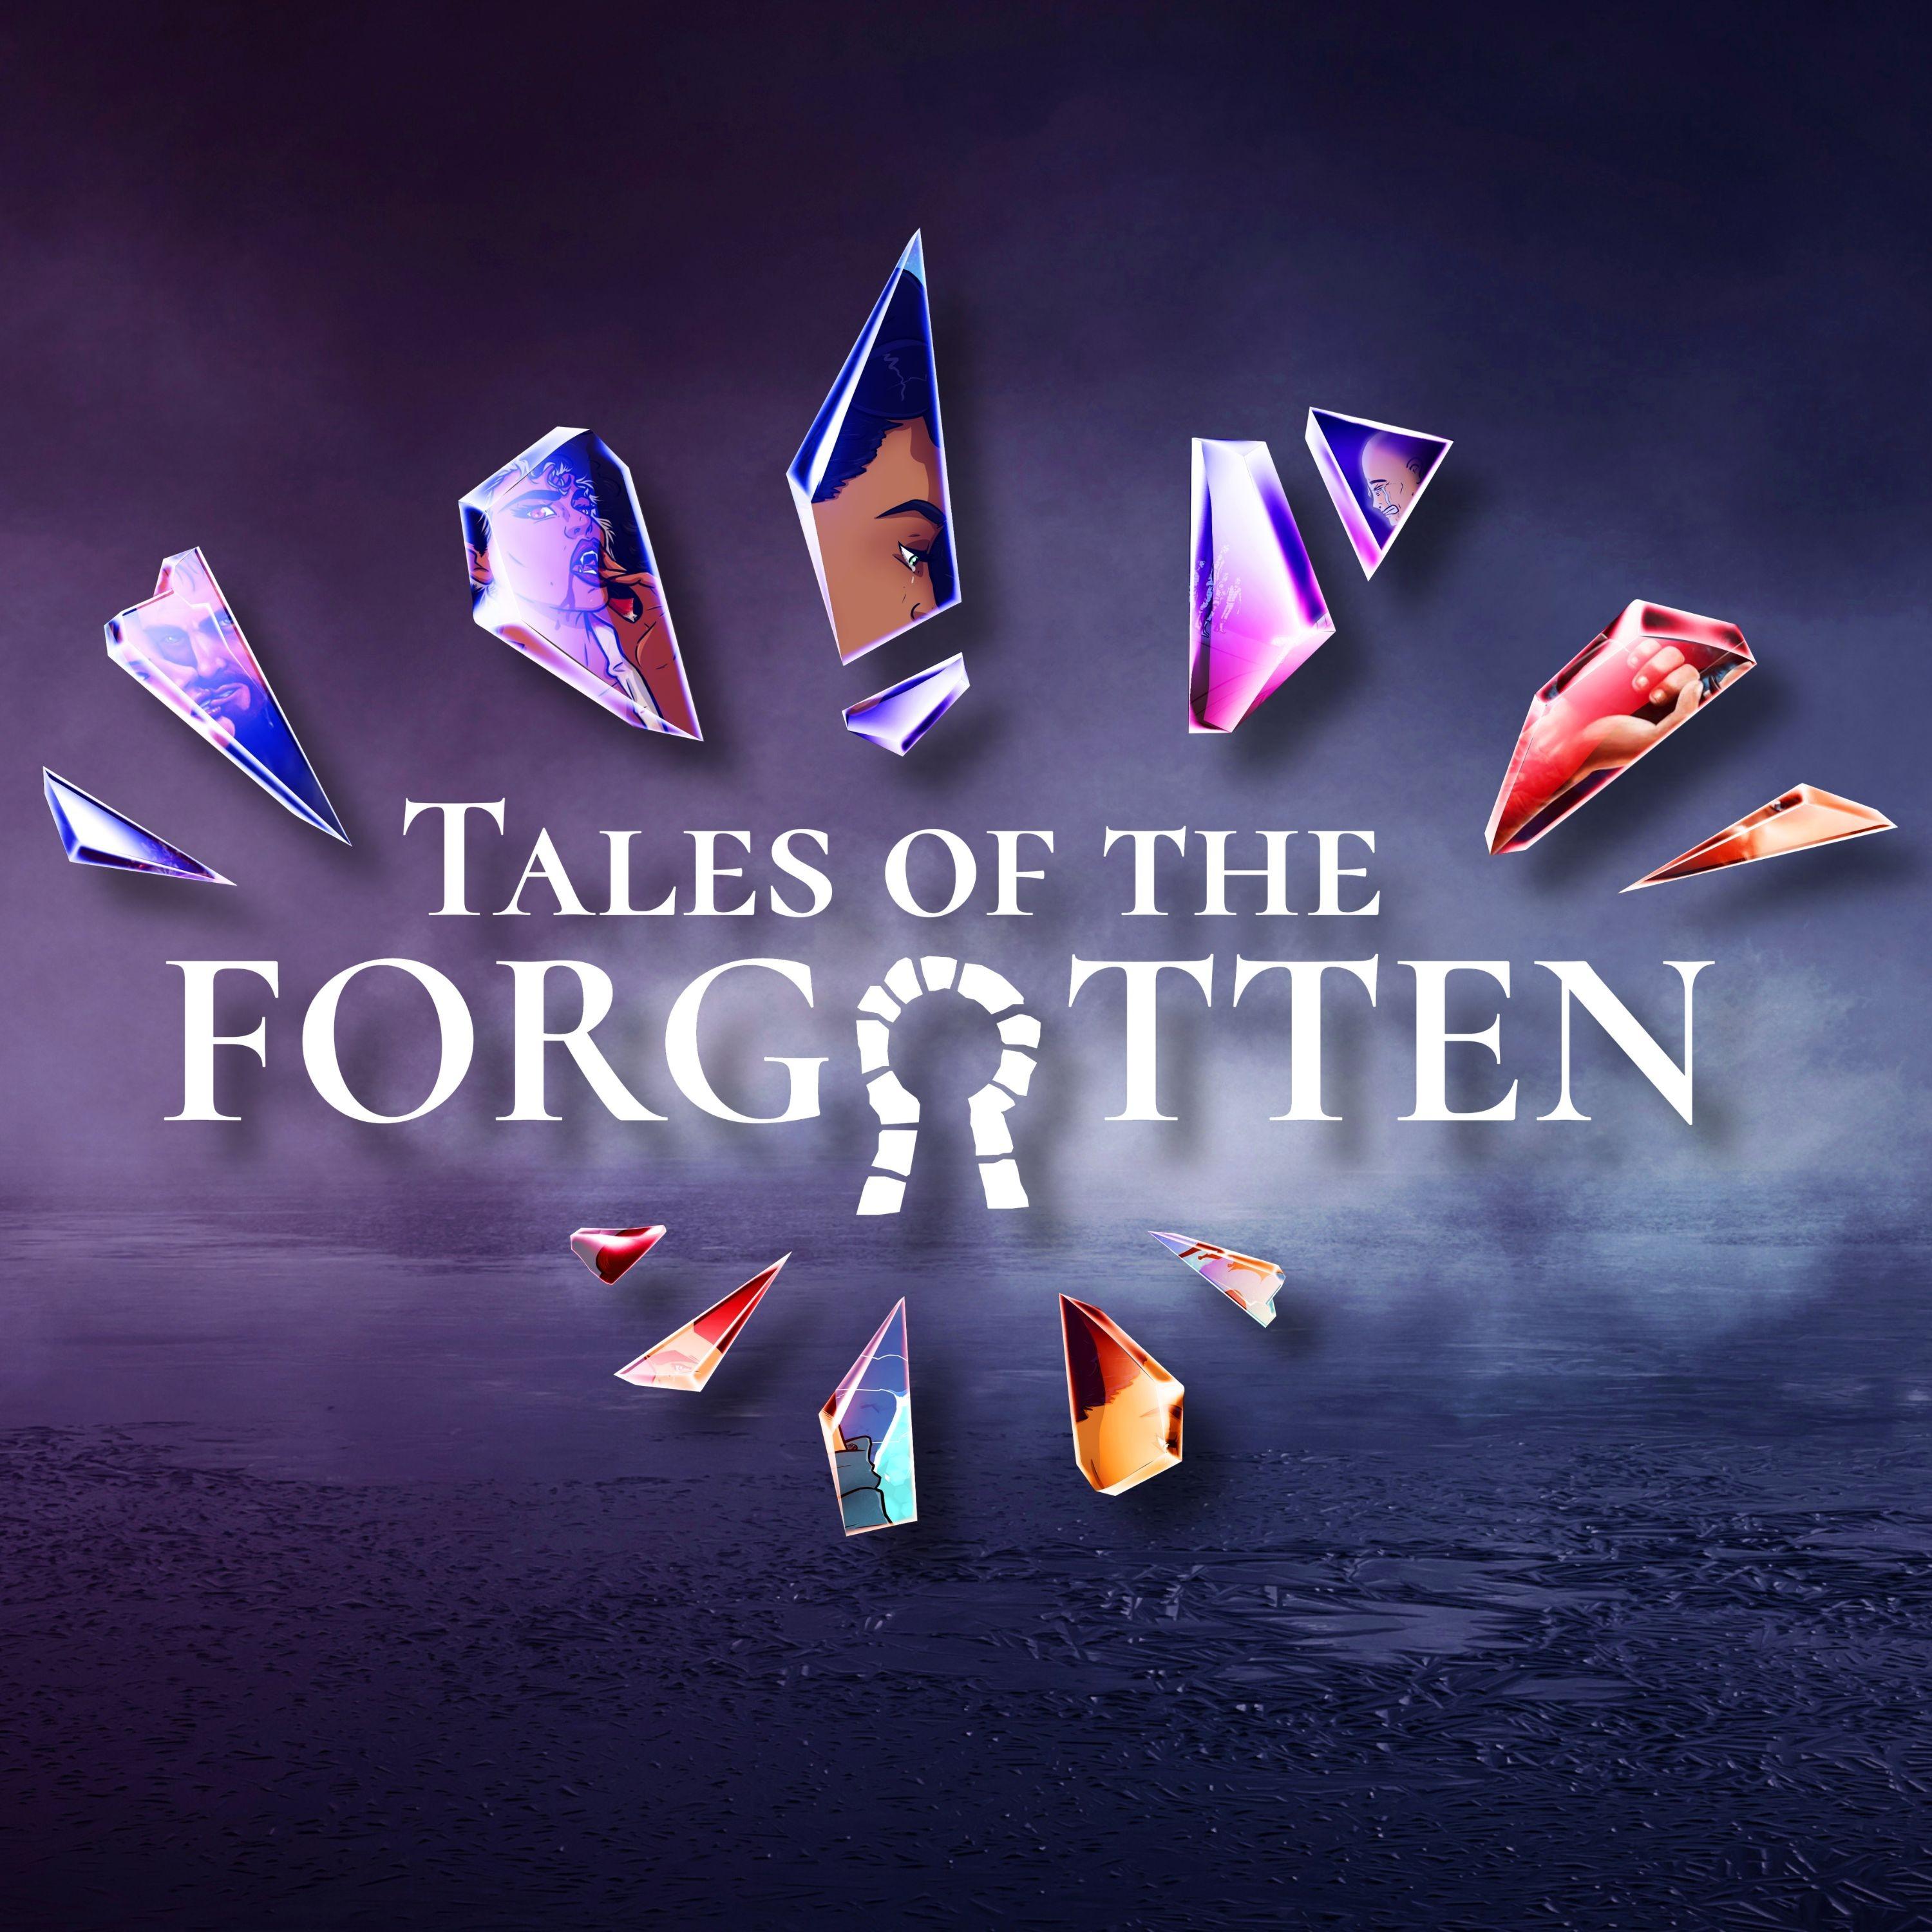 Tales of the Forgotten Fiction Network